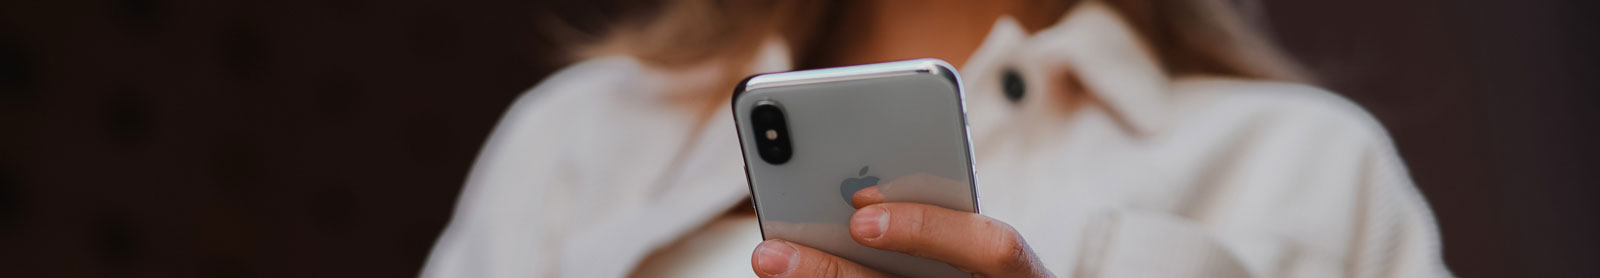 Cropped photo of a woman holding an iPhone